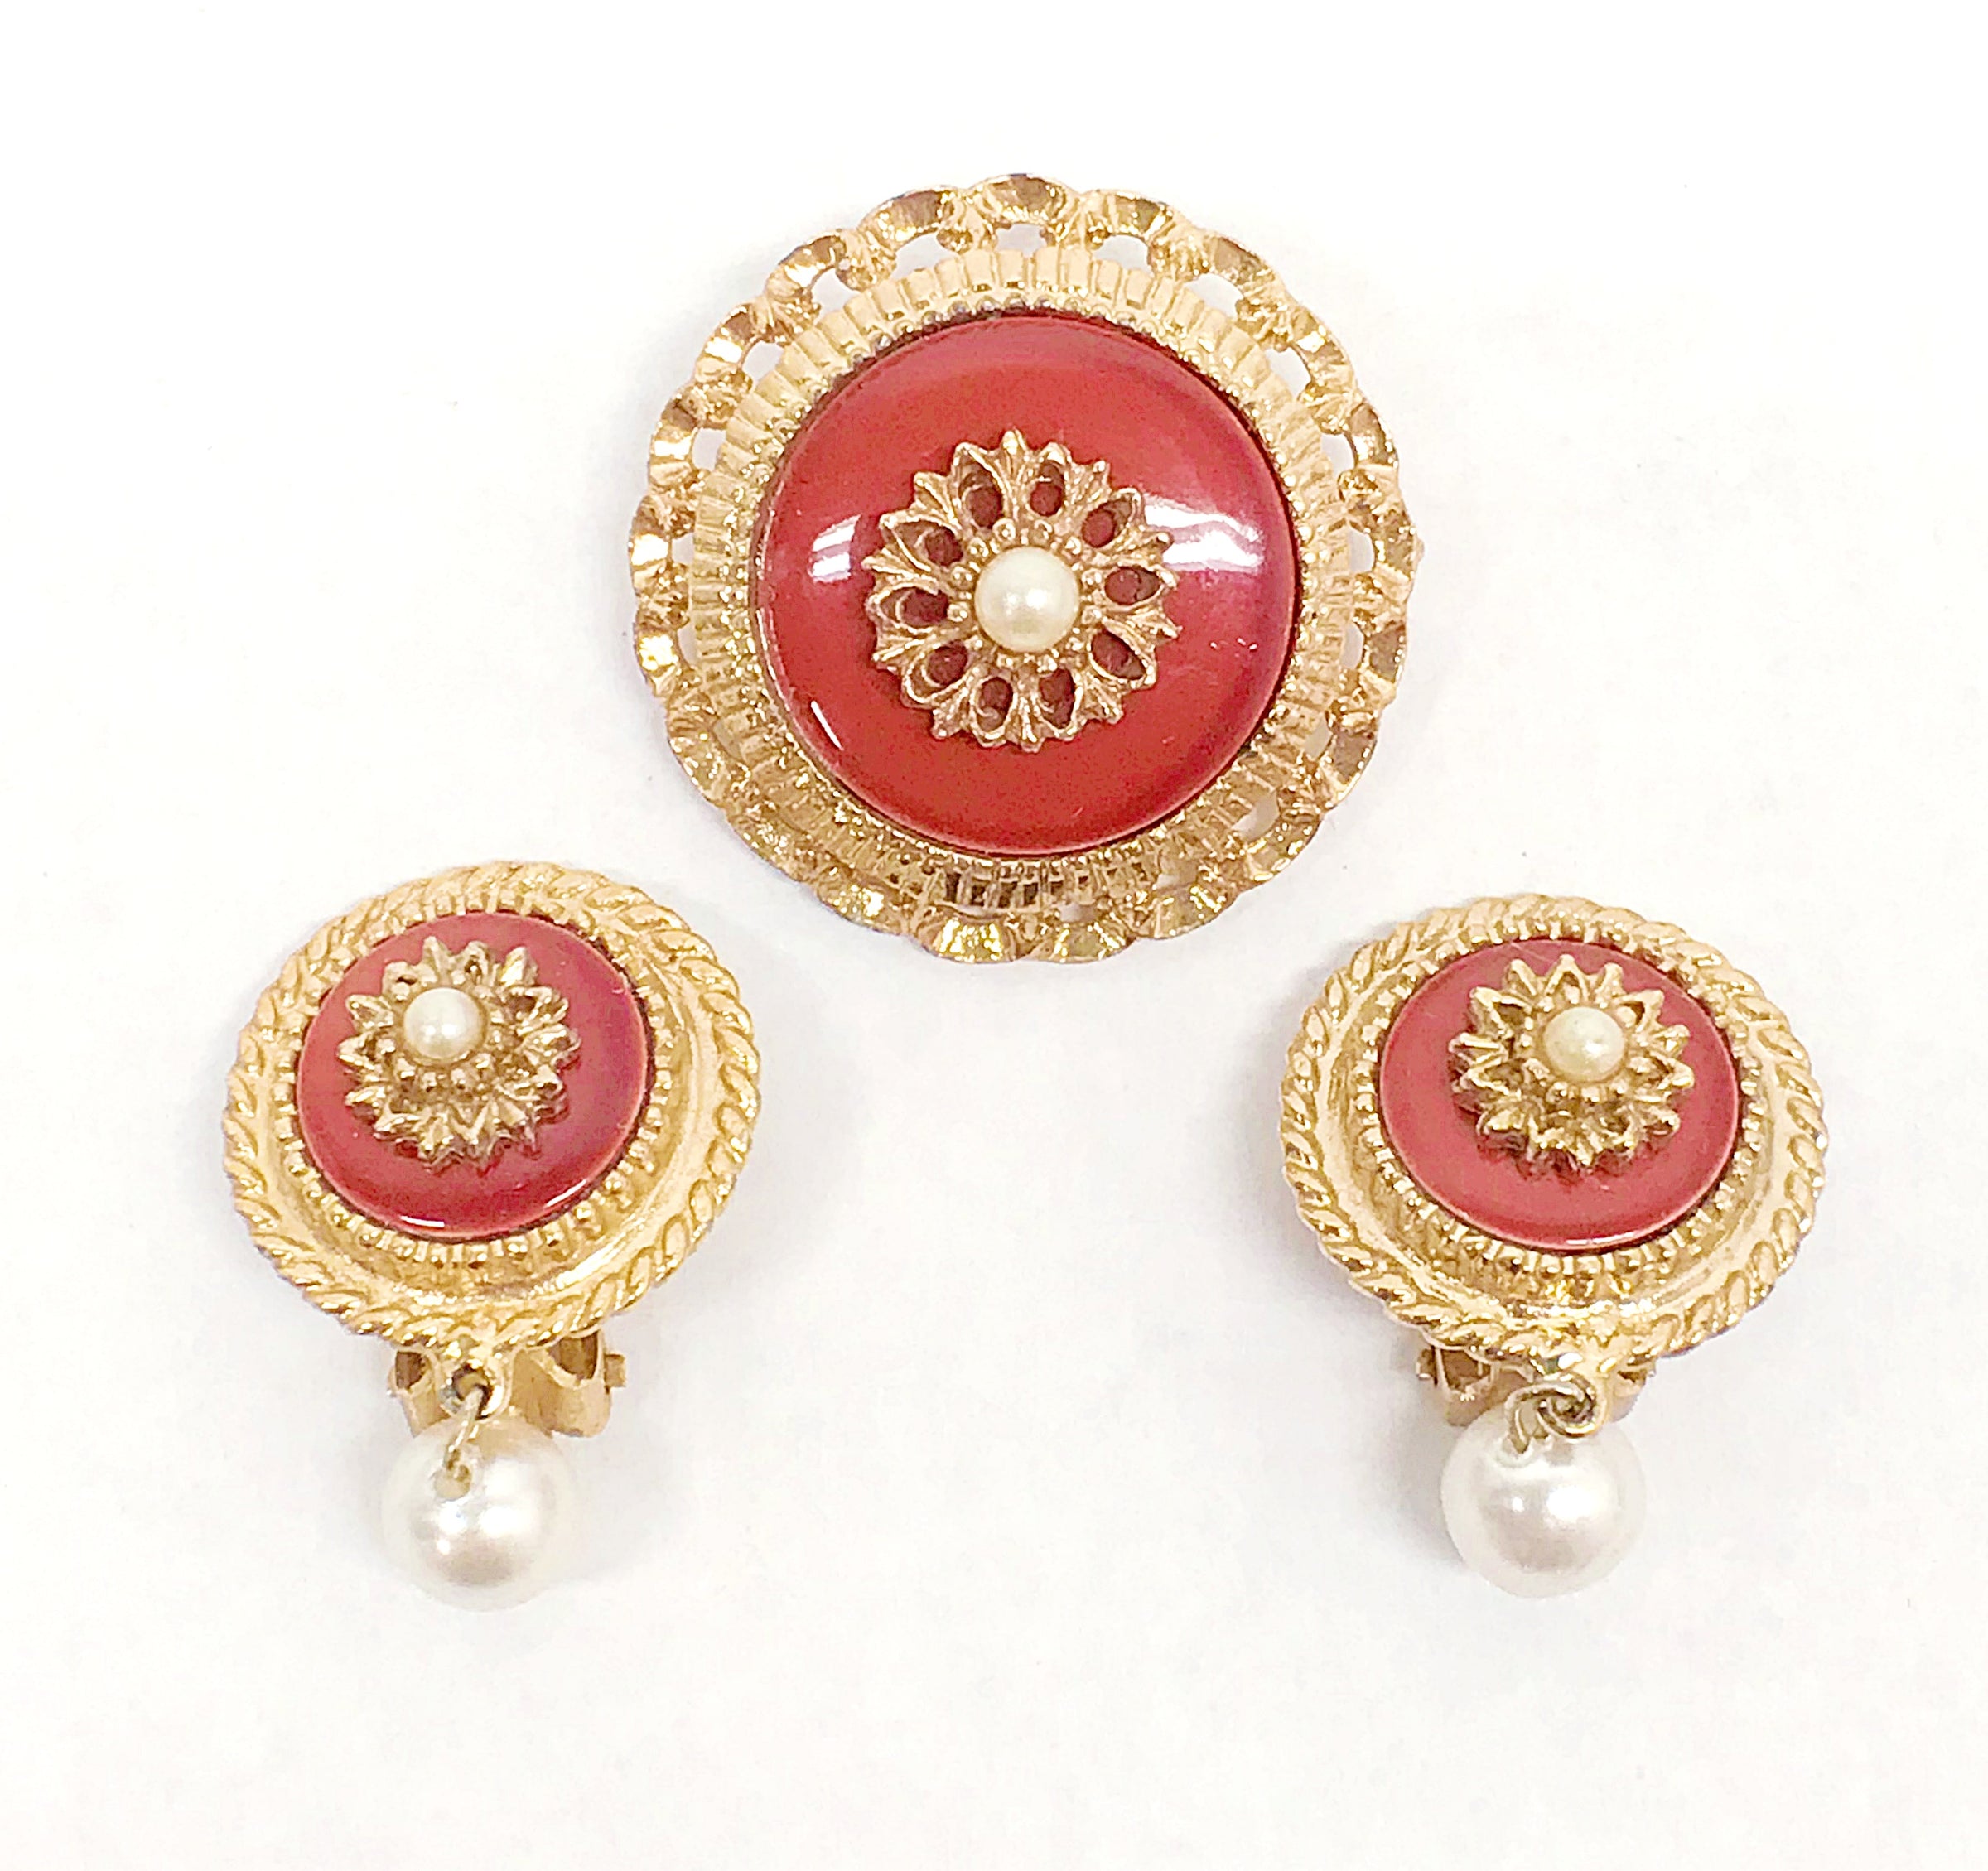 1972 Sarah Coventry Westminster Brooch and Clip-On Earrings Set - Hers and His Treasures